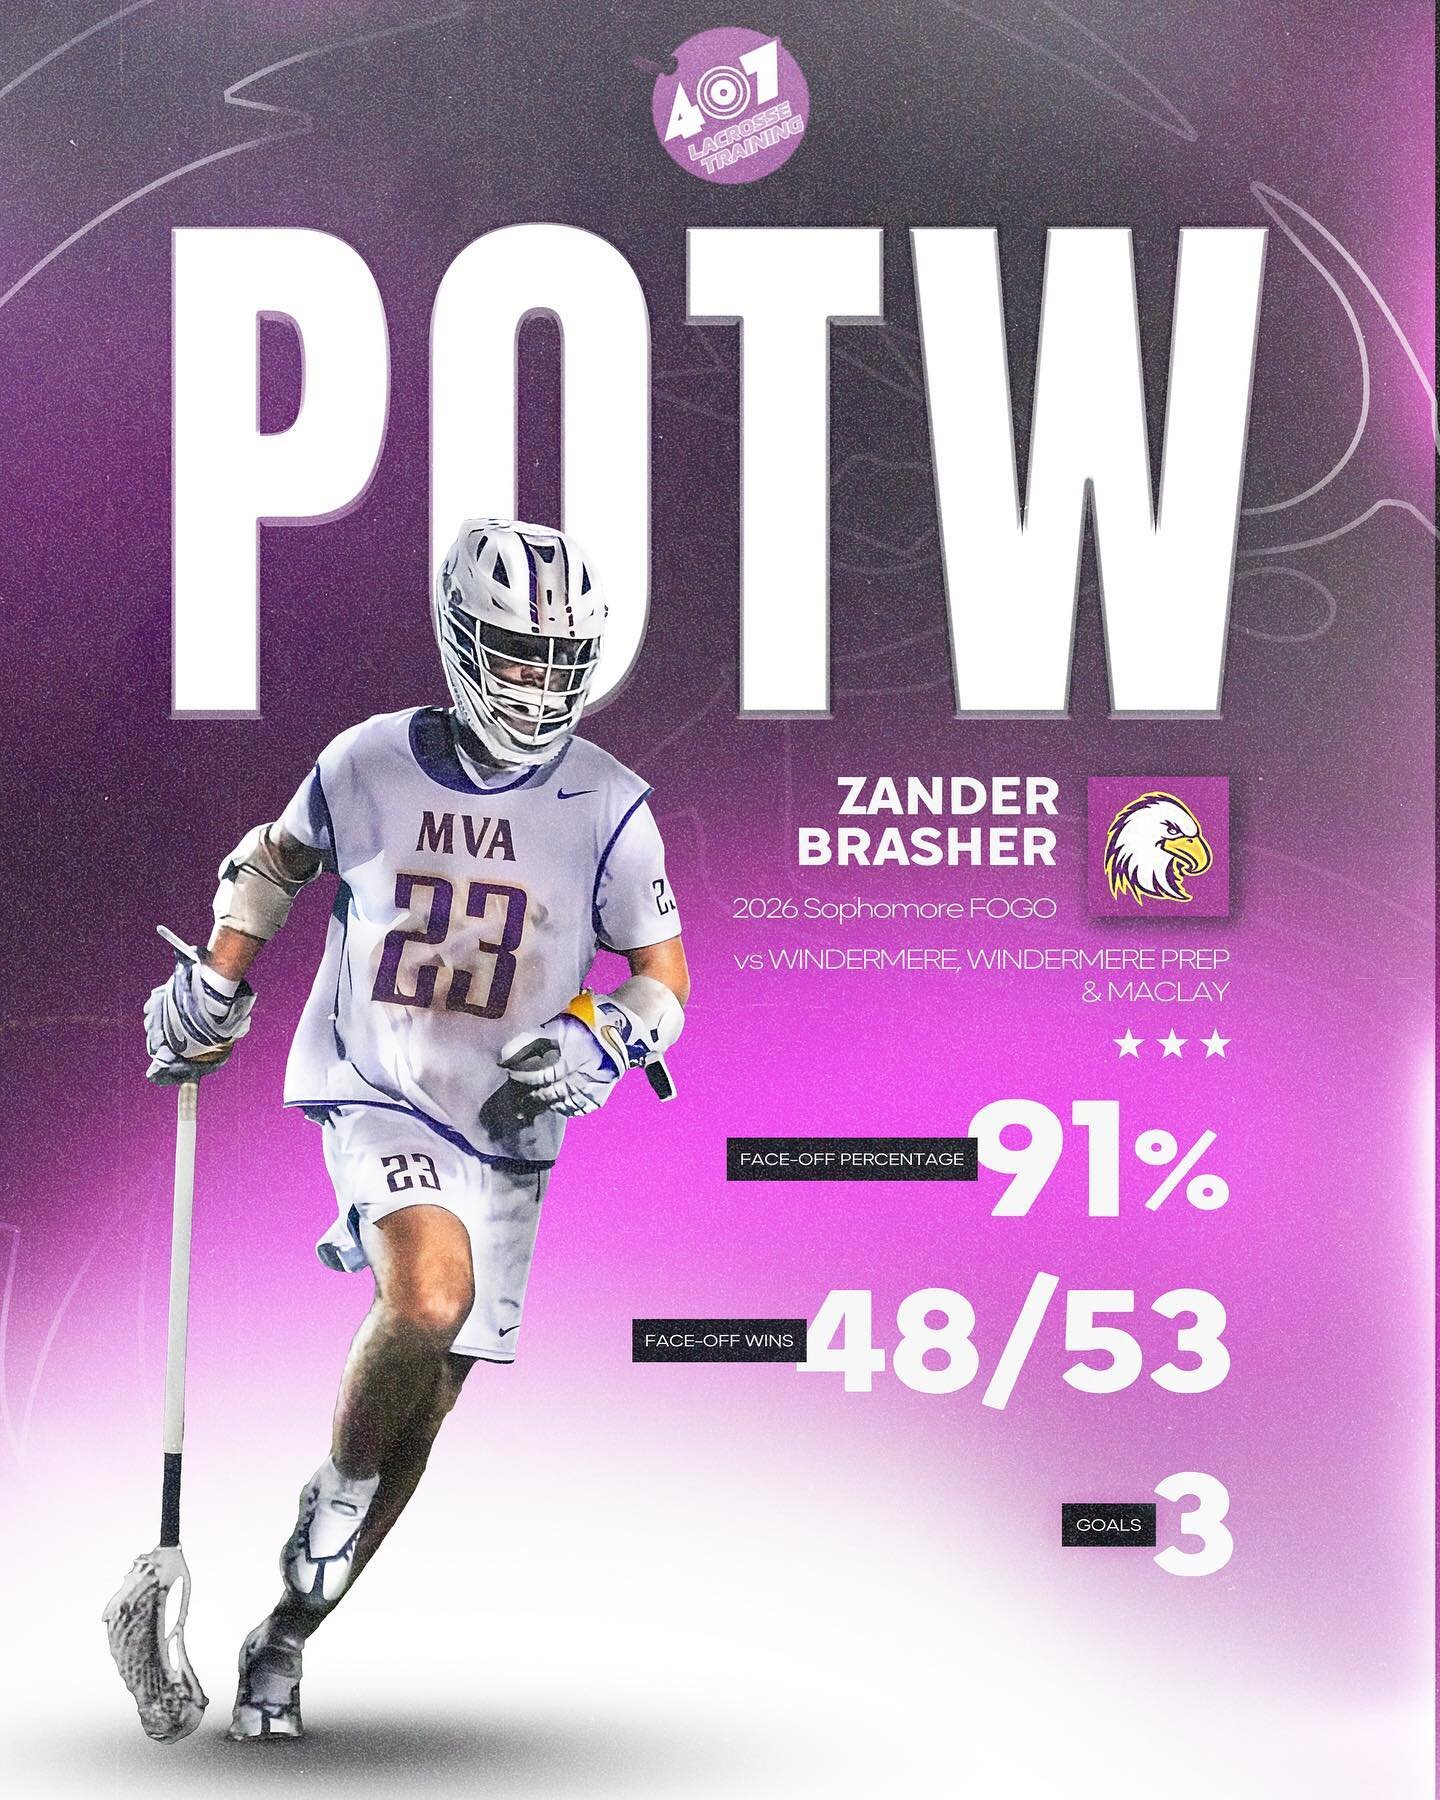 The Man, The Myth, The (soon to be) Legend.. @zander.brasher has been a force to reckon with at the Face Off X this year and is also racking up stats in the goal column. Congrats to our Week 4 Player of the Week 🔥🍊